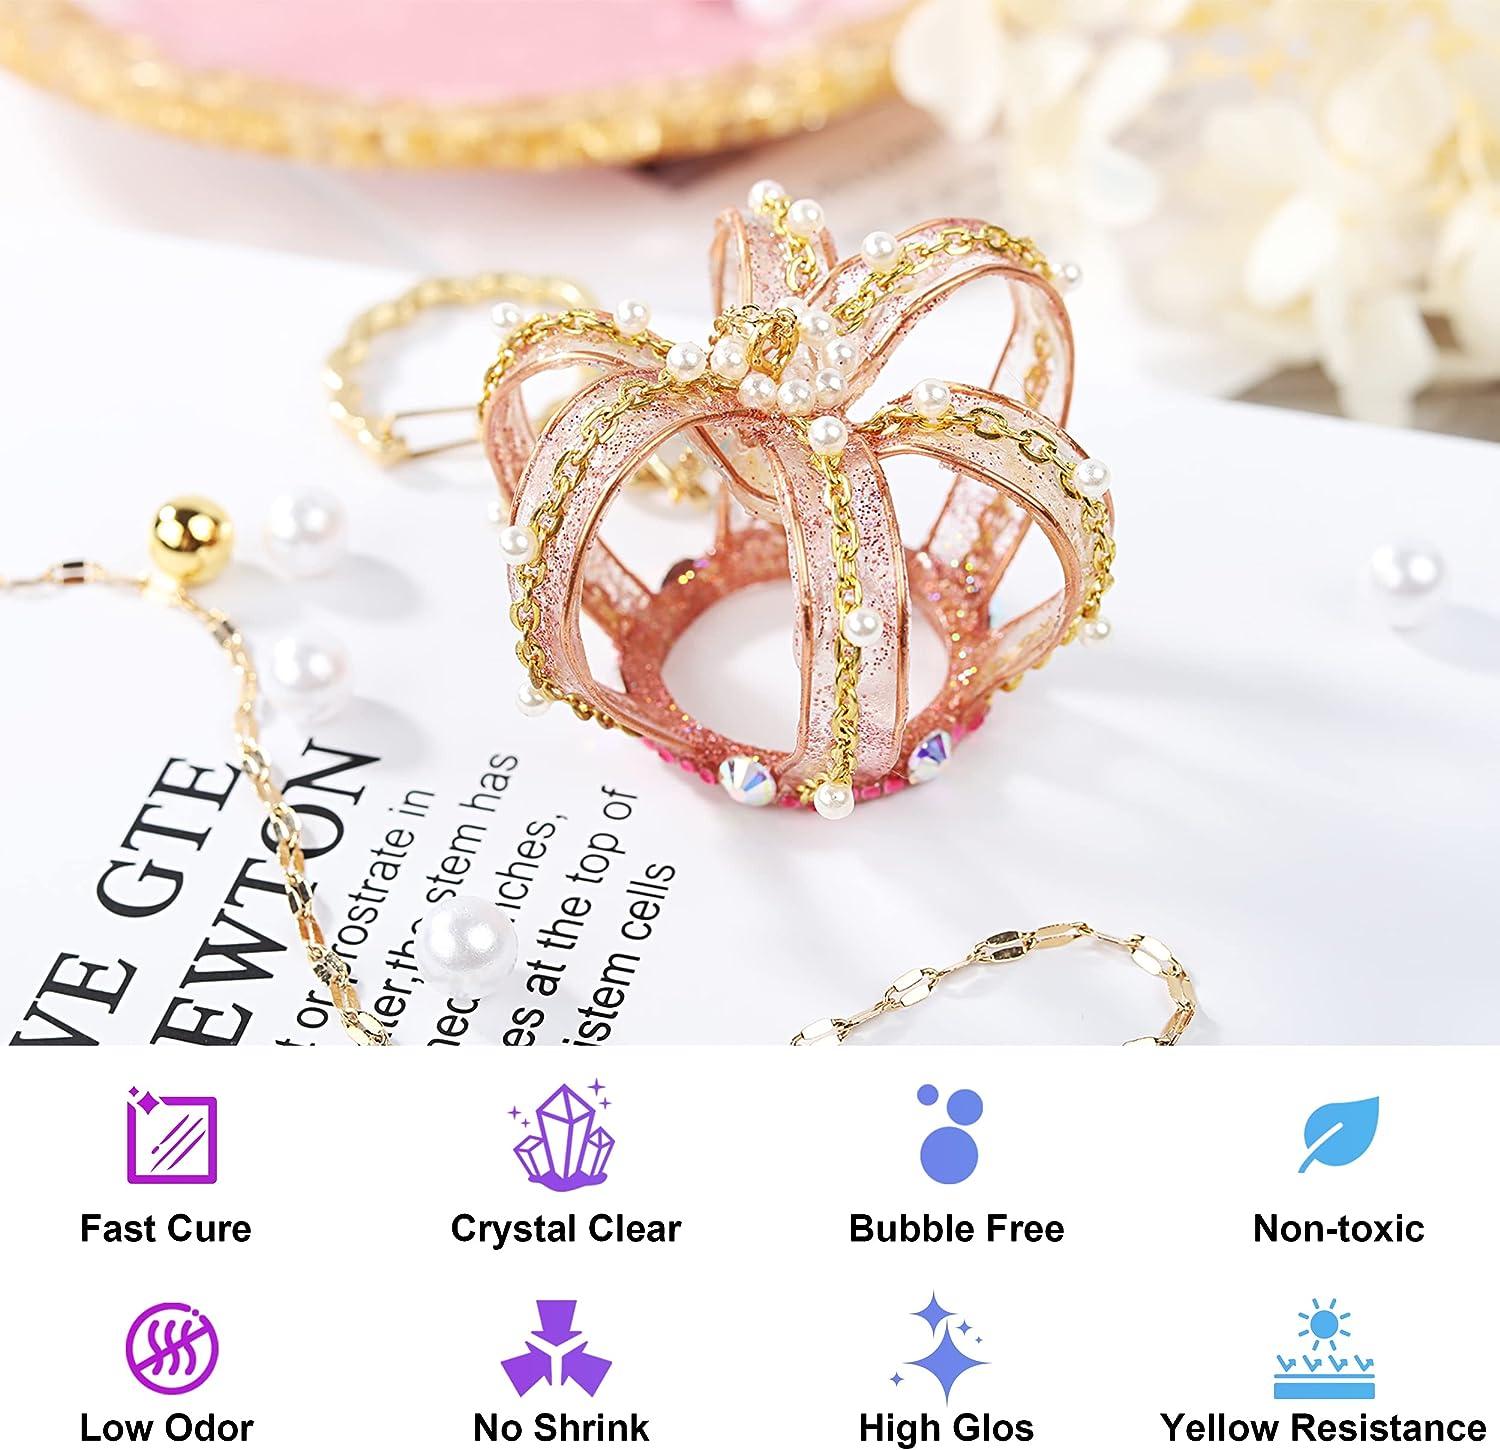 LET'S RESIN UV Resin Kit with Light,153Pcs Resin Jewelry Making Kit with  250g Crystal Clear Low Odor UV Resin, UV Lamp, Resin Accessories, Epoxy  Resin Starter Kit for Keychain, Jewelry, Home Decor